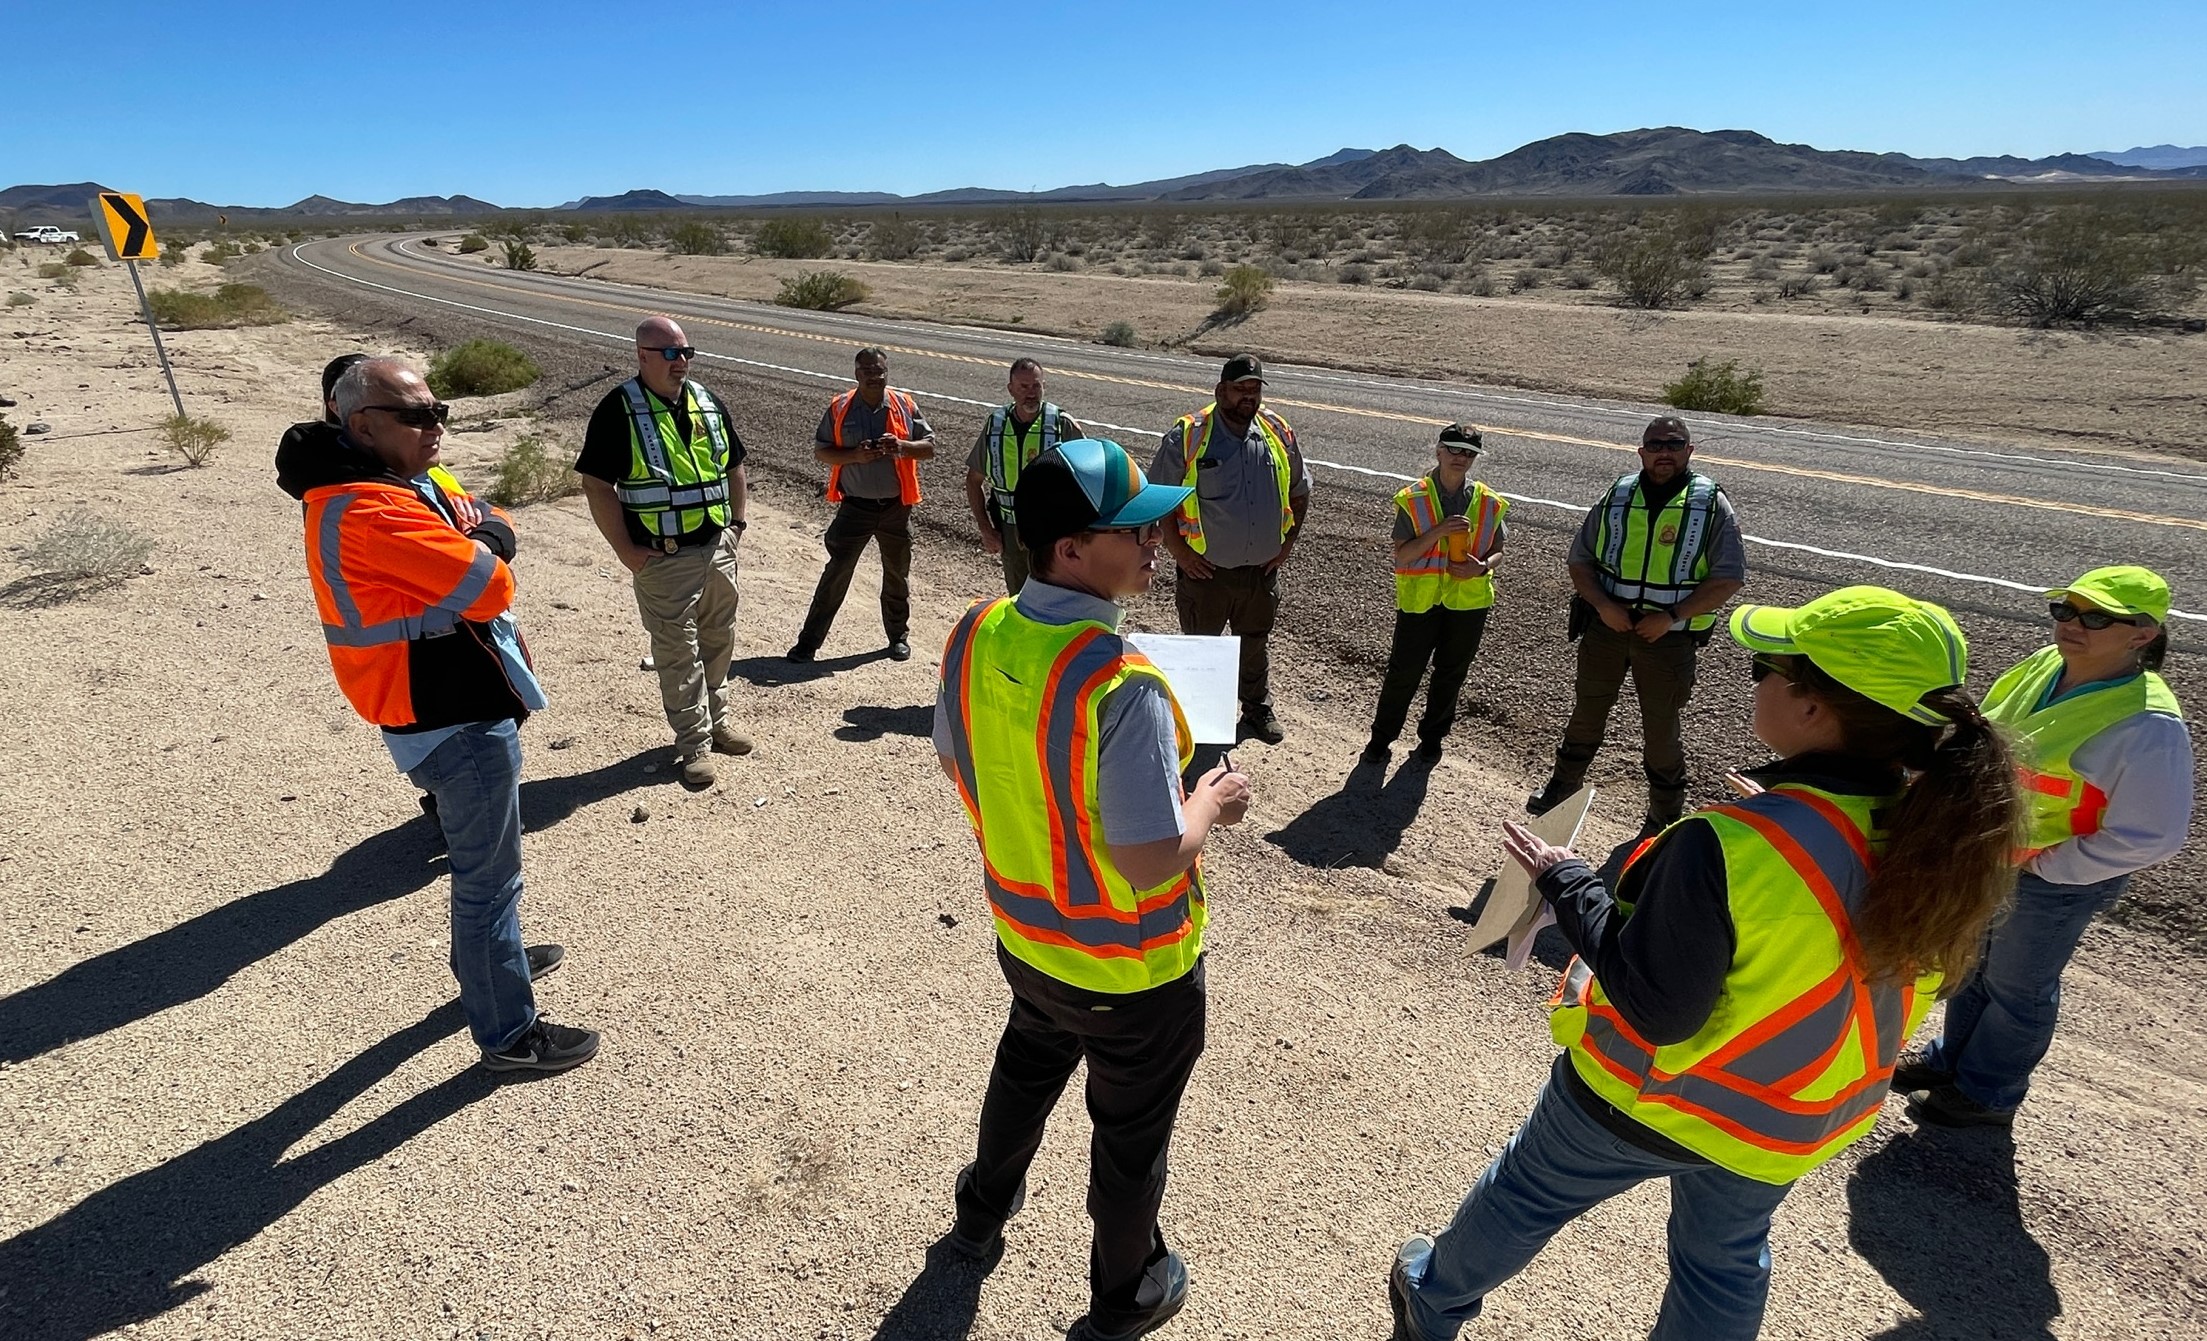 A group of people wearing safety vests, meeting on the side of a park road to discuss Transportation Safety